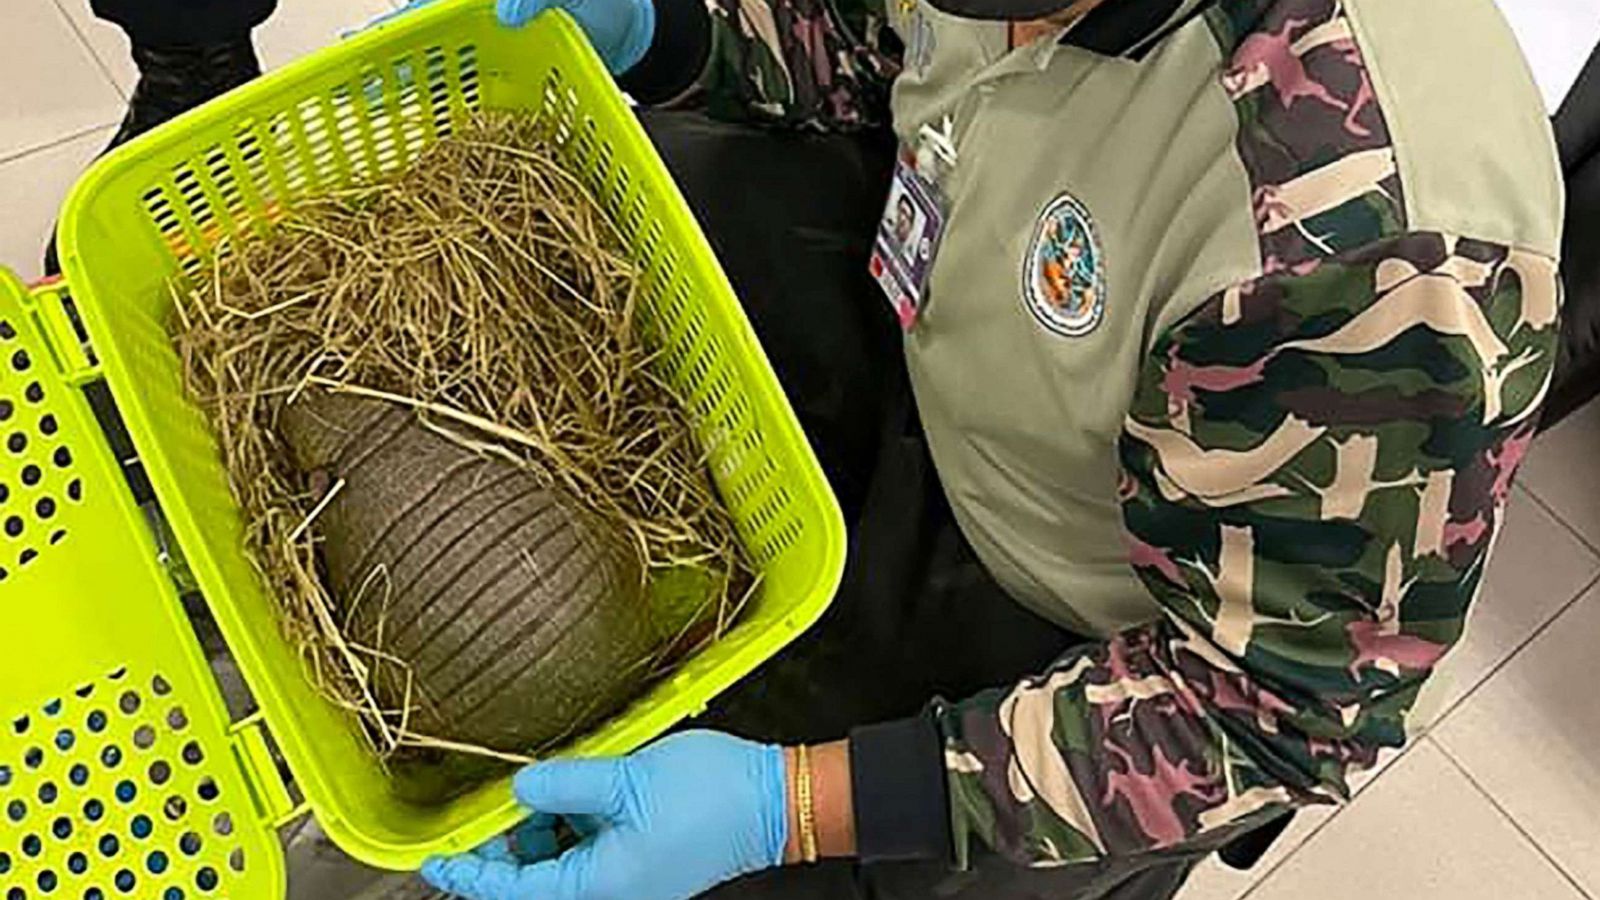 109 live animals found in women's luggage in massive airport wildlife  trafficking bust - ABC News